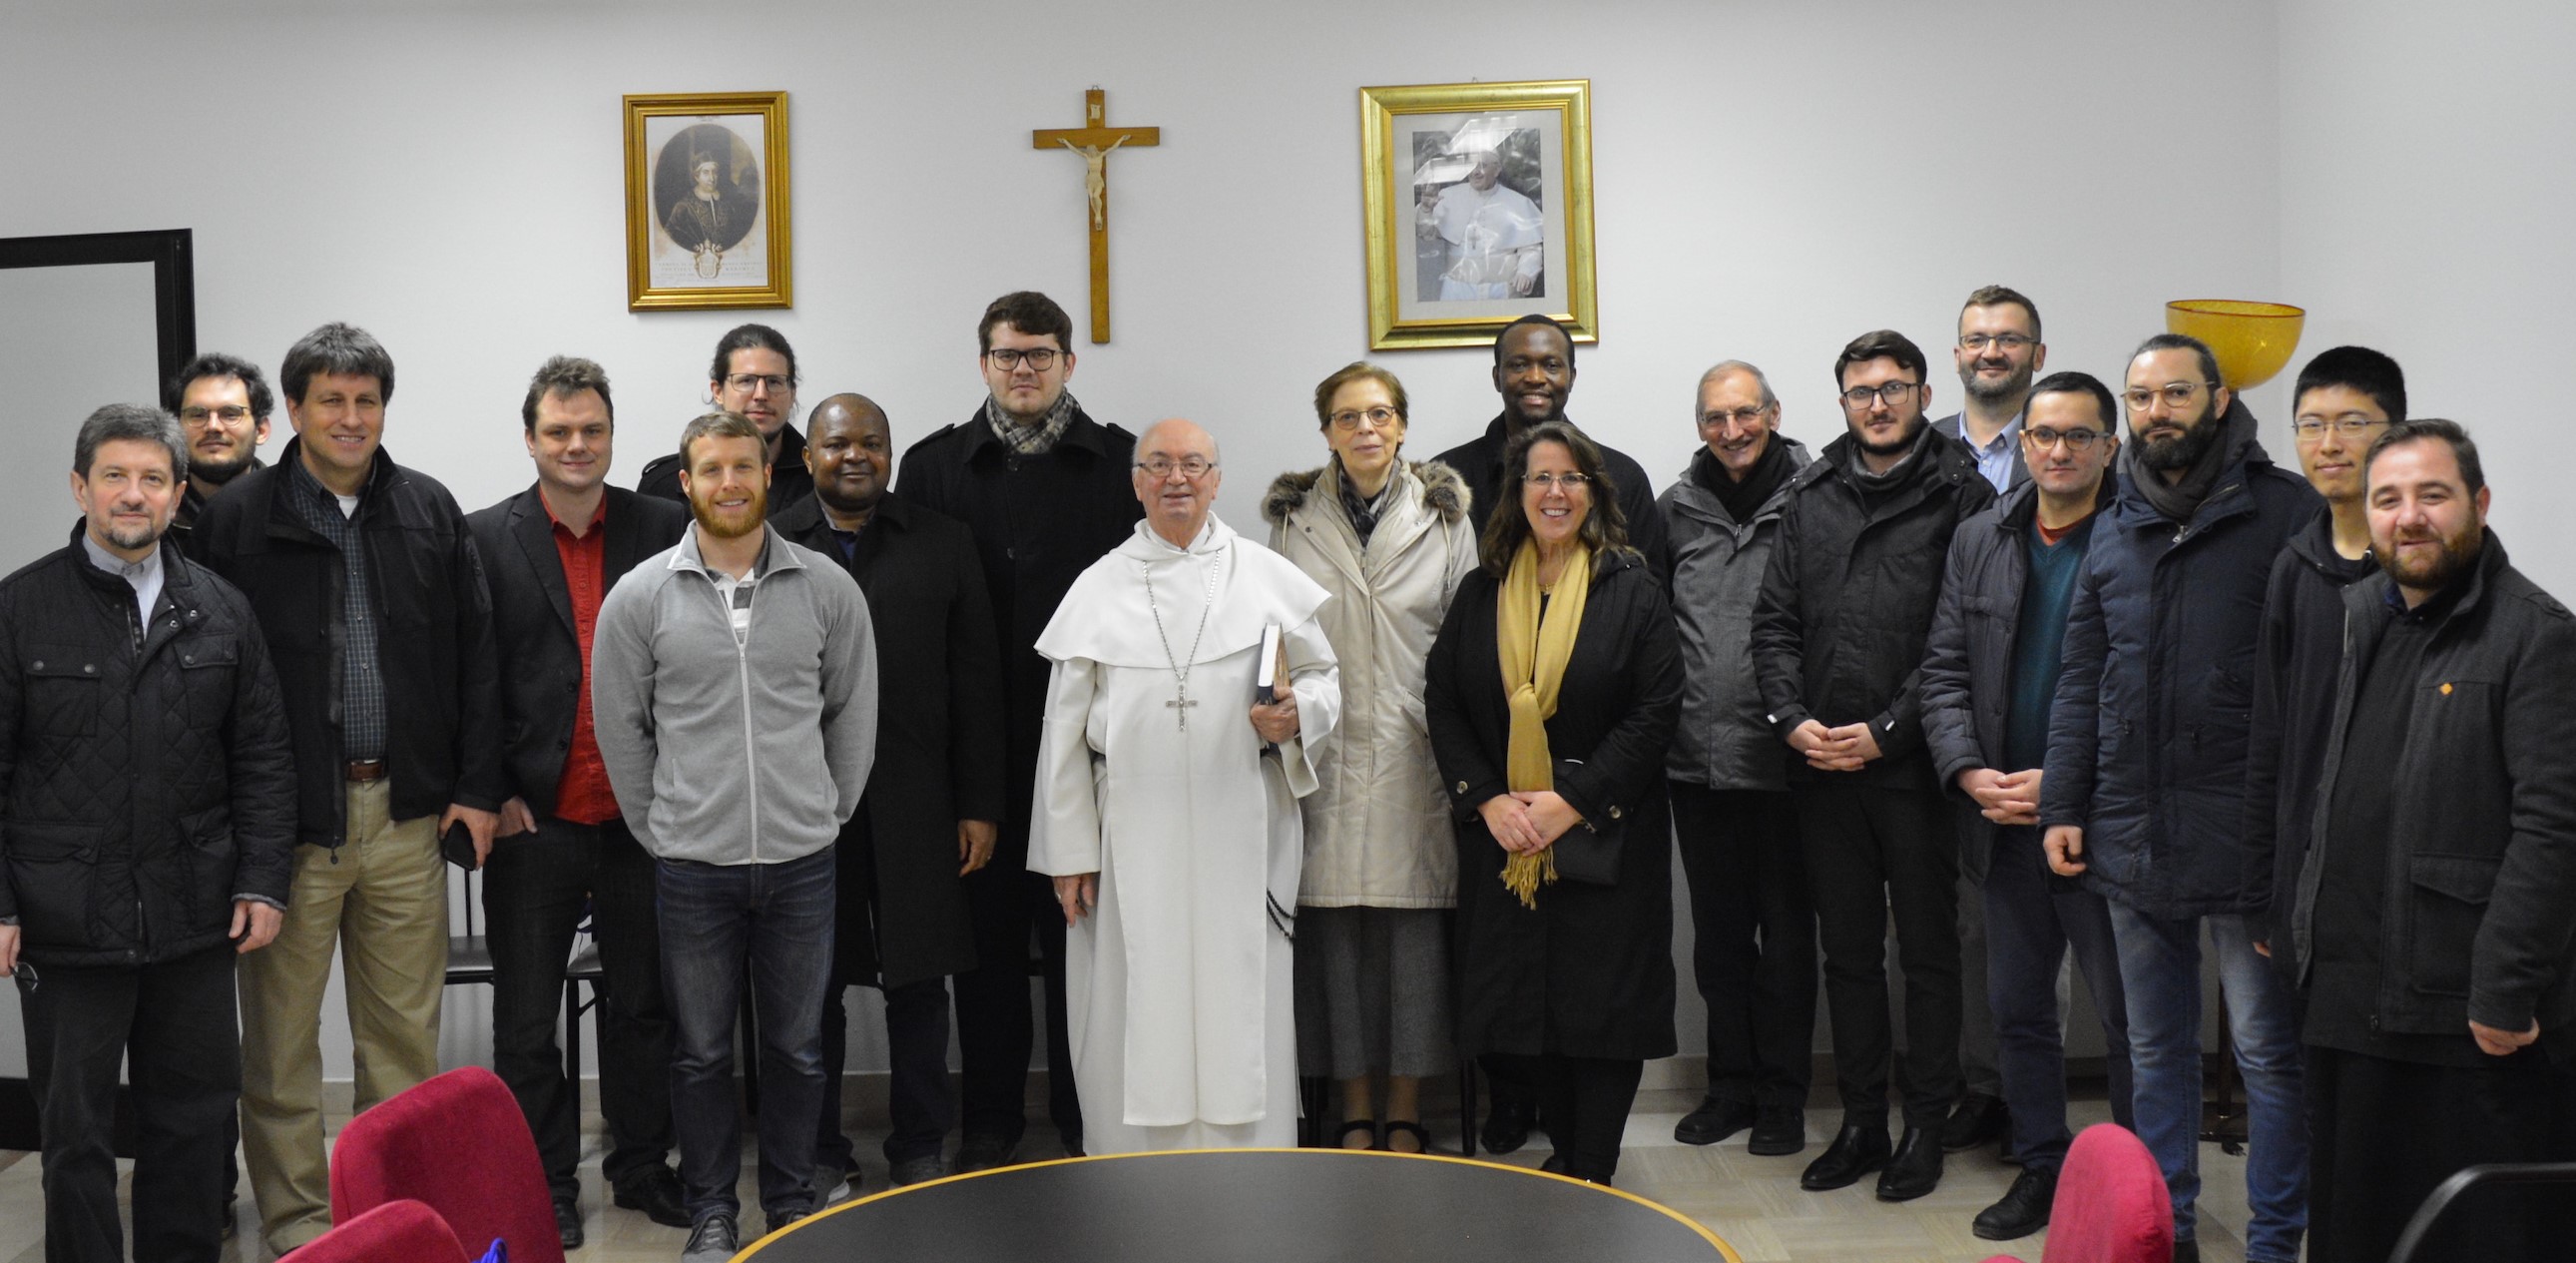 The group with the Catholic archbishop Mons. George Frendo o.p.